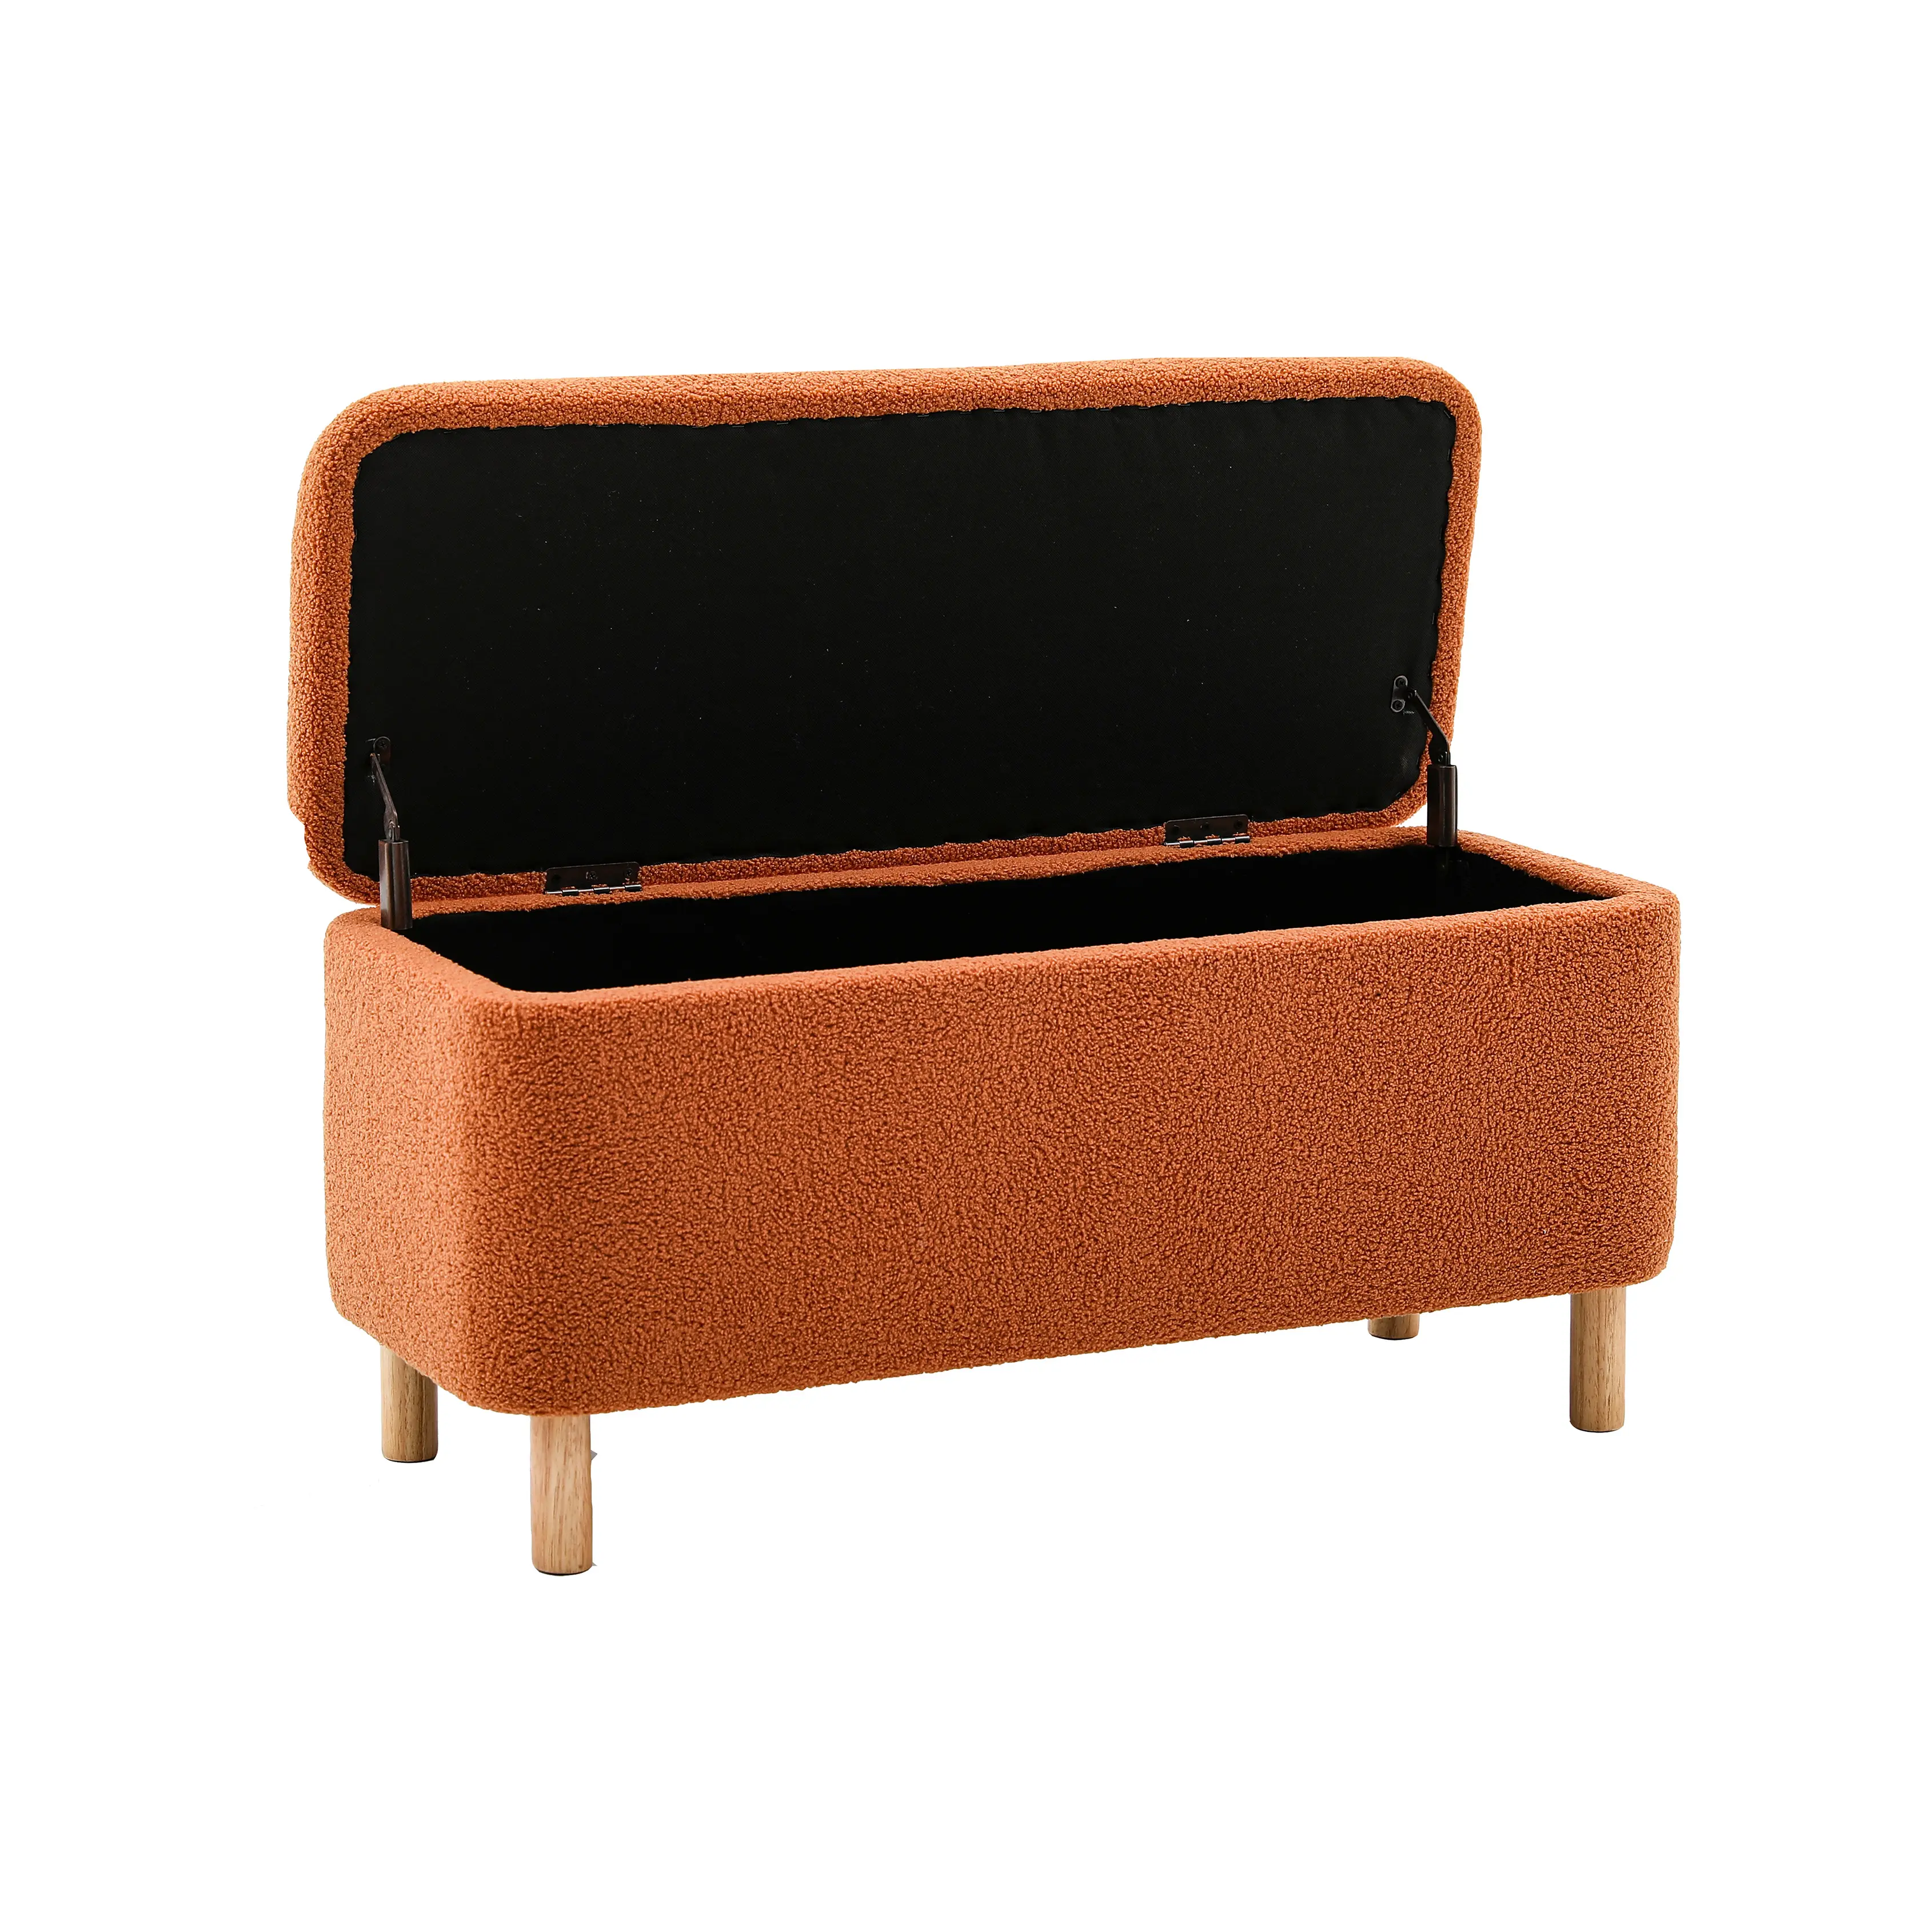 Customization Storage Bench Ottoman Teddy Fabric Wooden Legs Modern Tuffted Bench For Bedroom